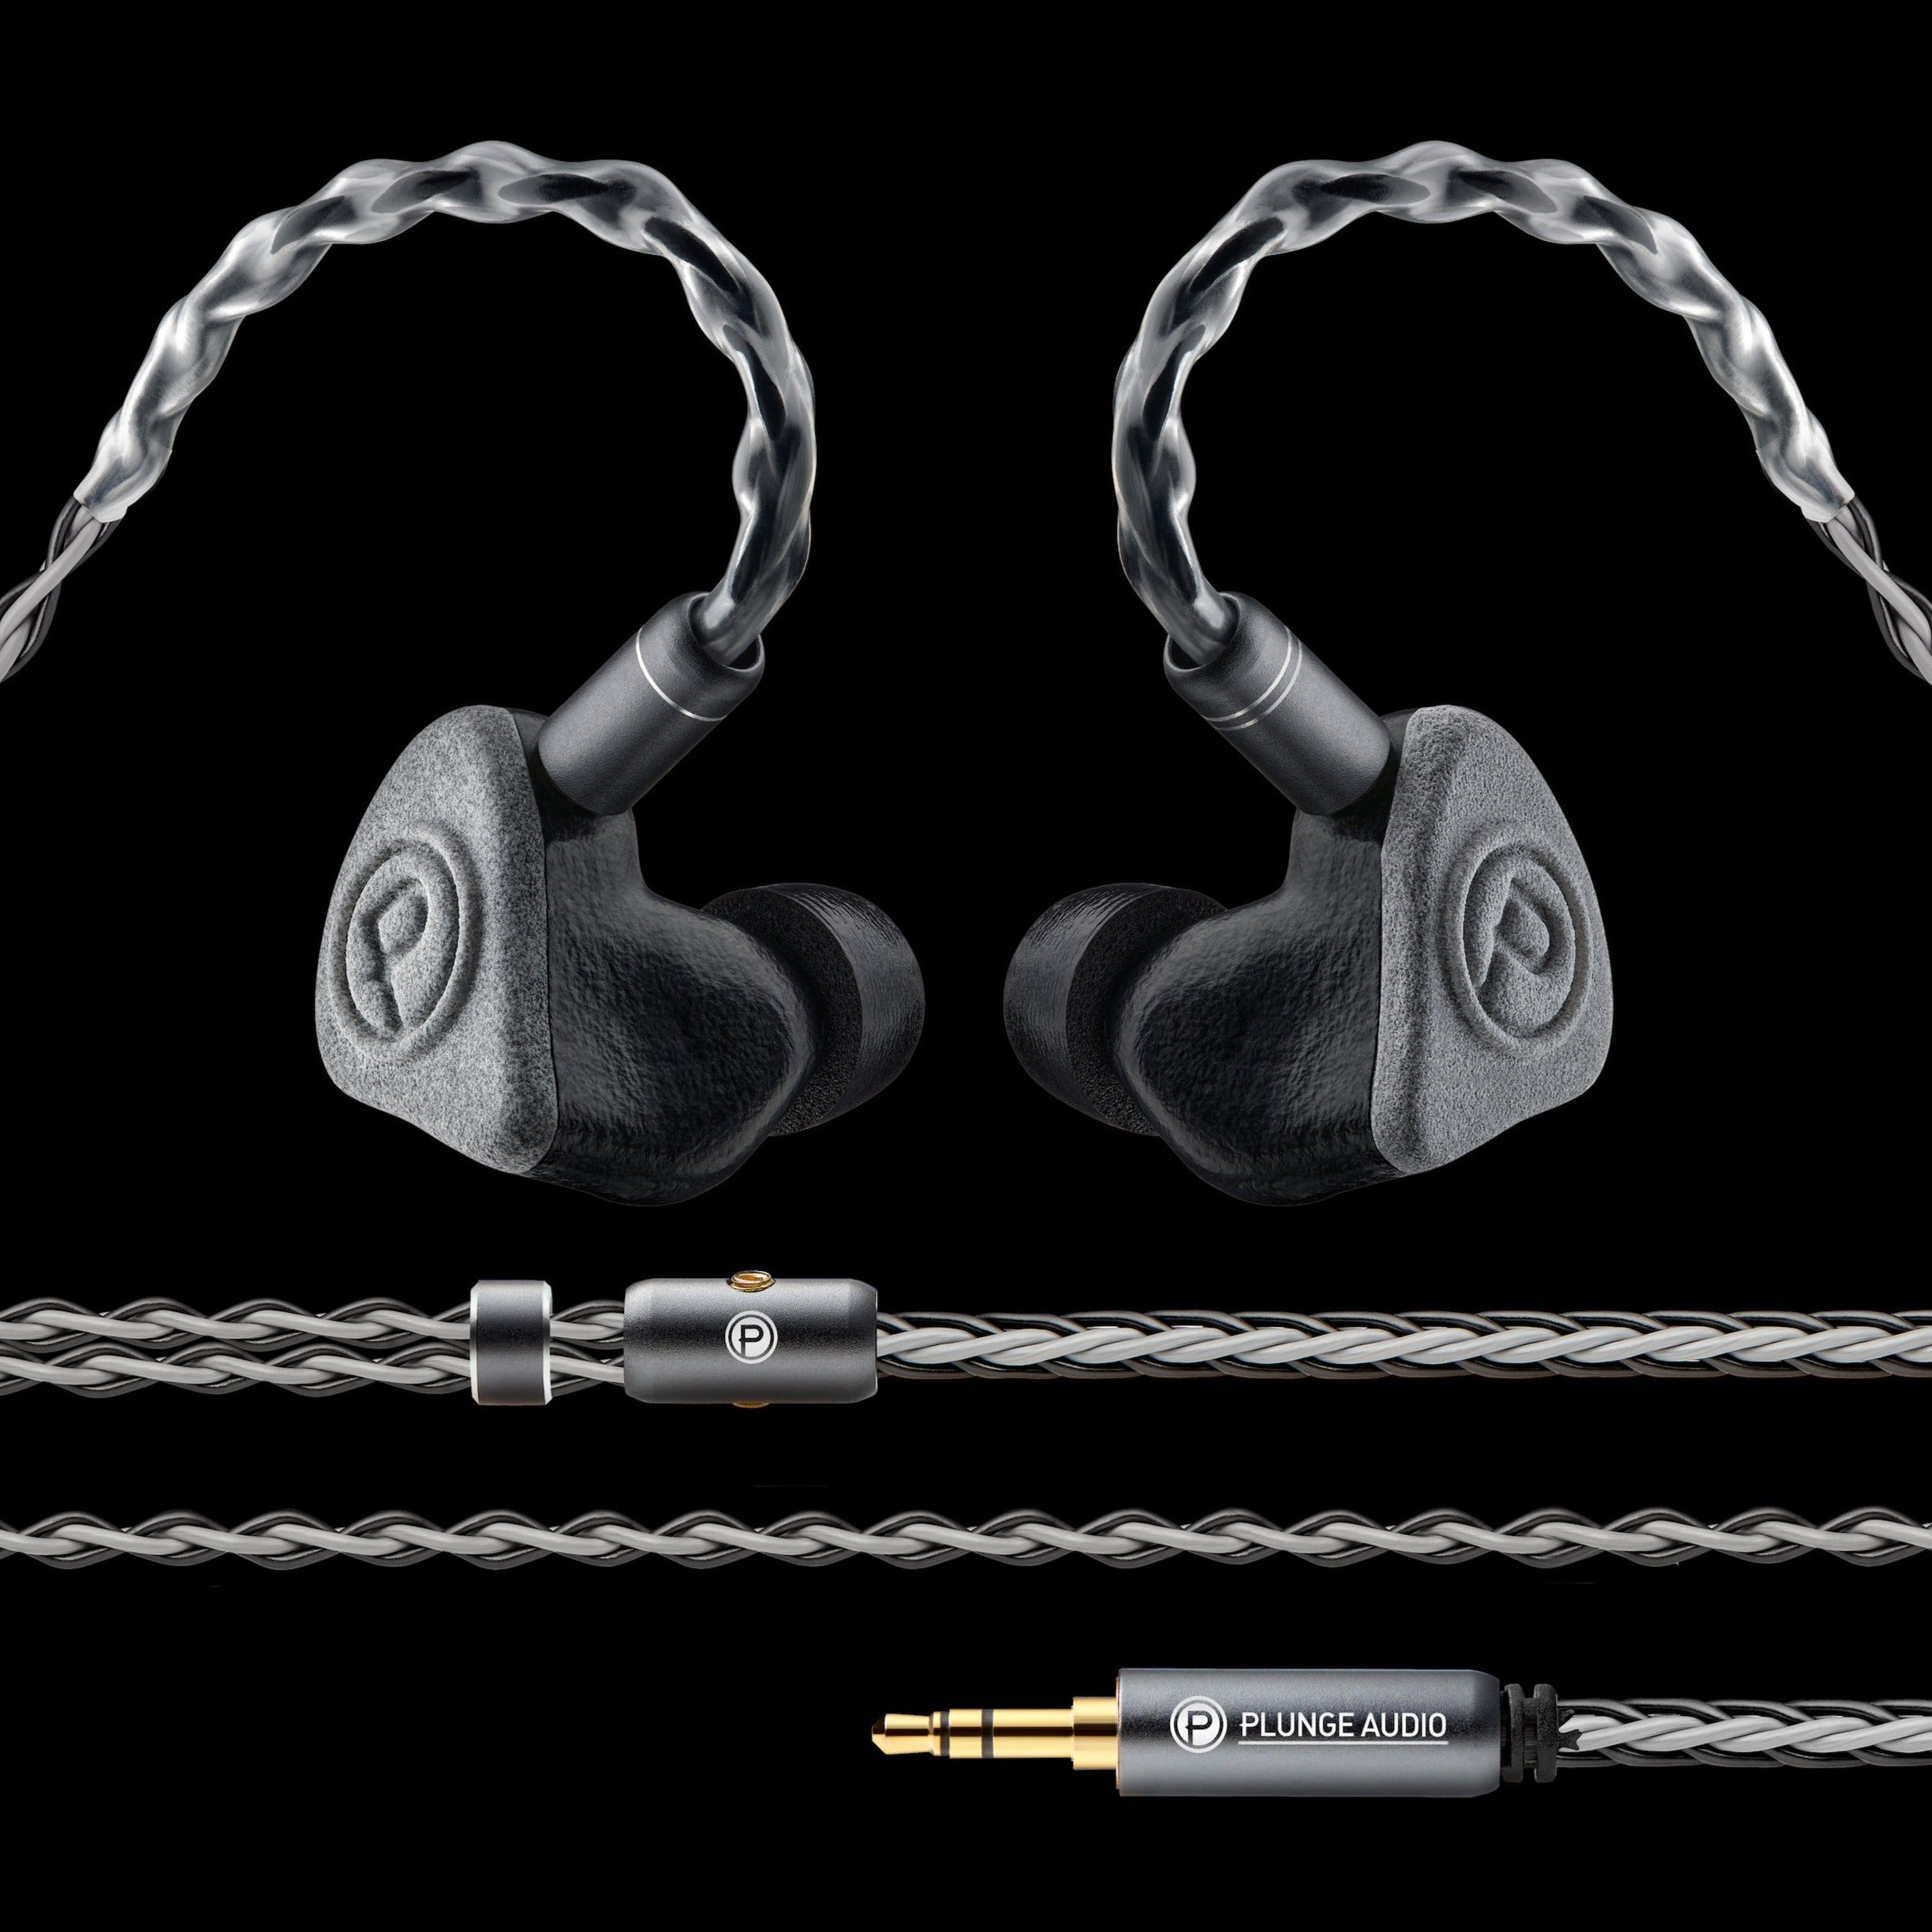 Plunge Audio grey IEMs and cable.